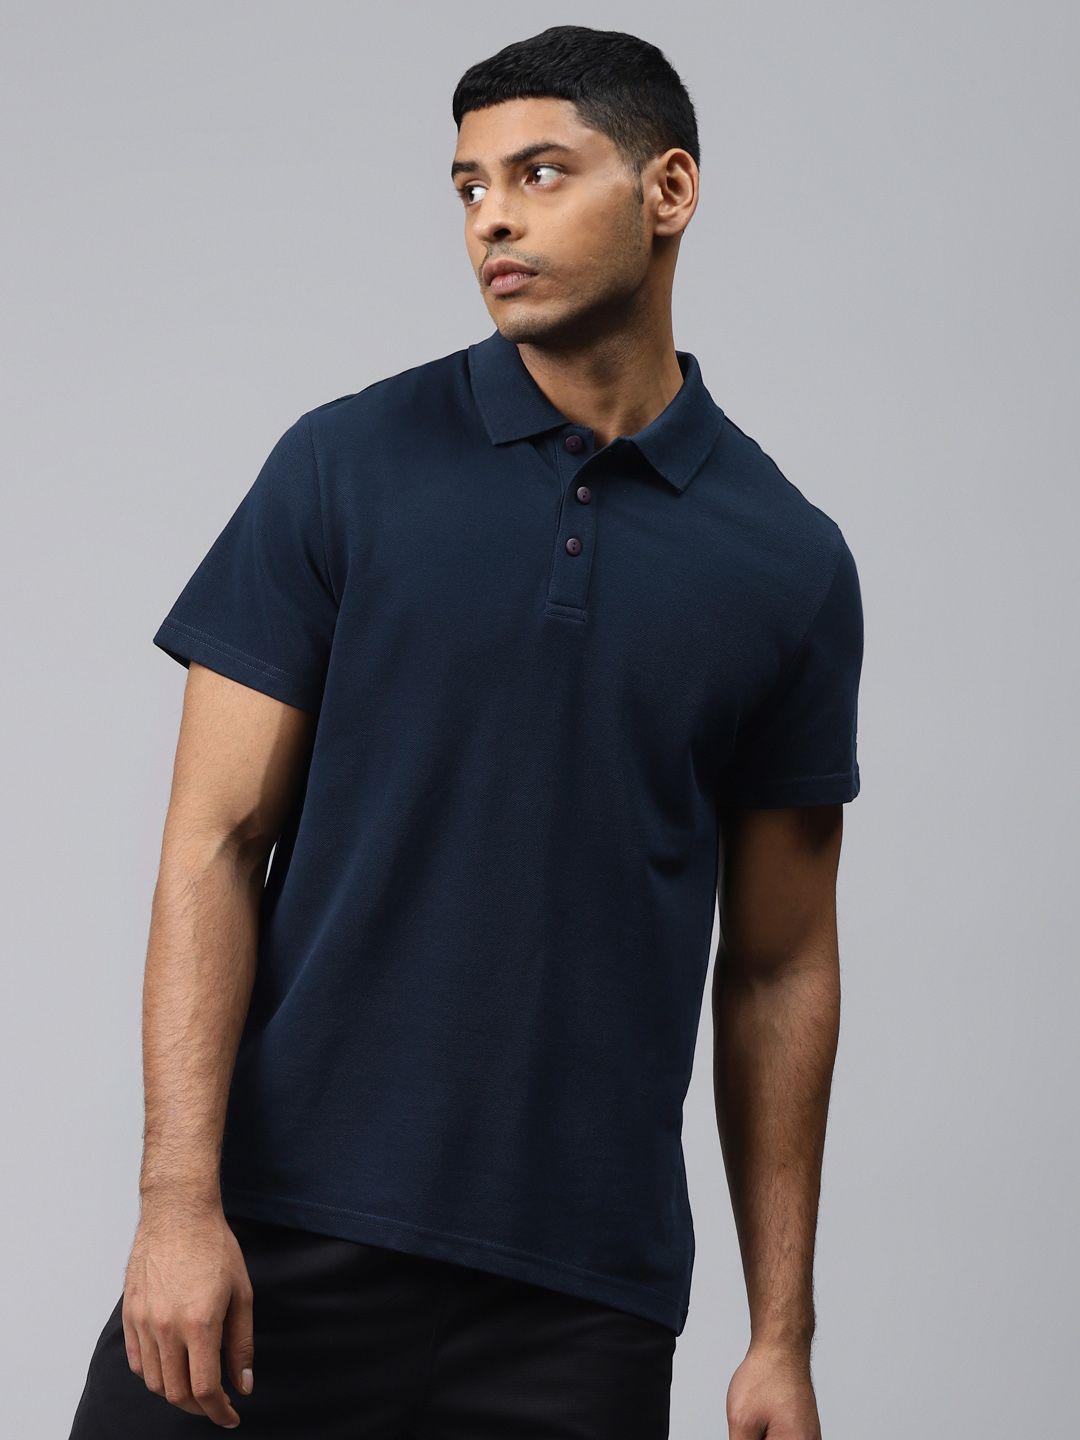 adidas men navy blue sport inspired essential base solid polo collar t-shirt